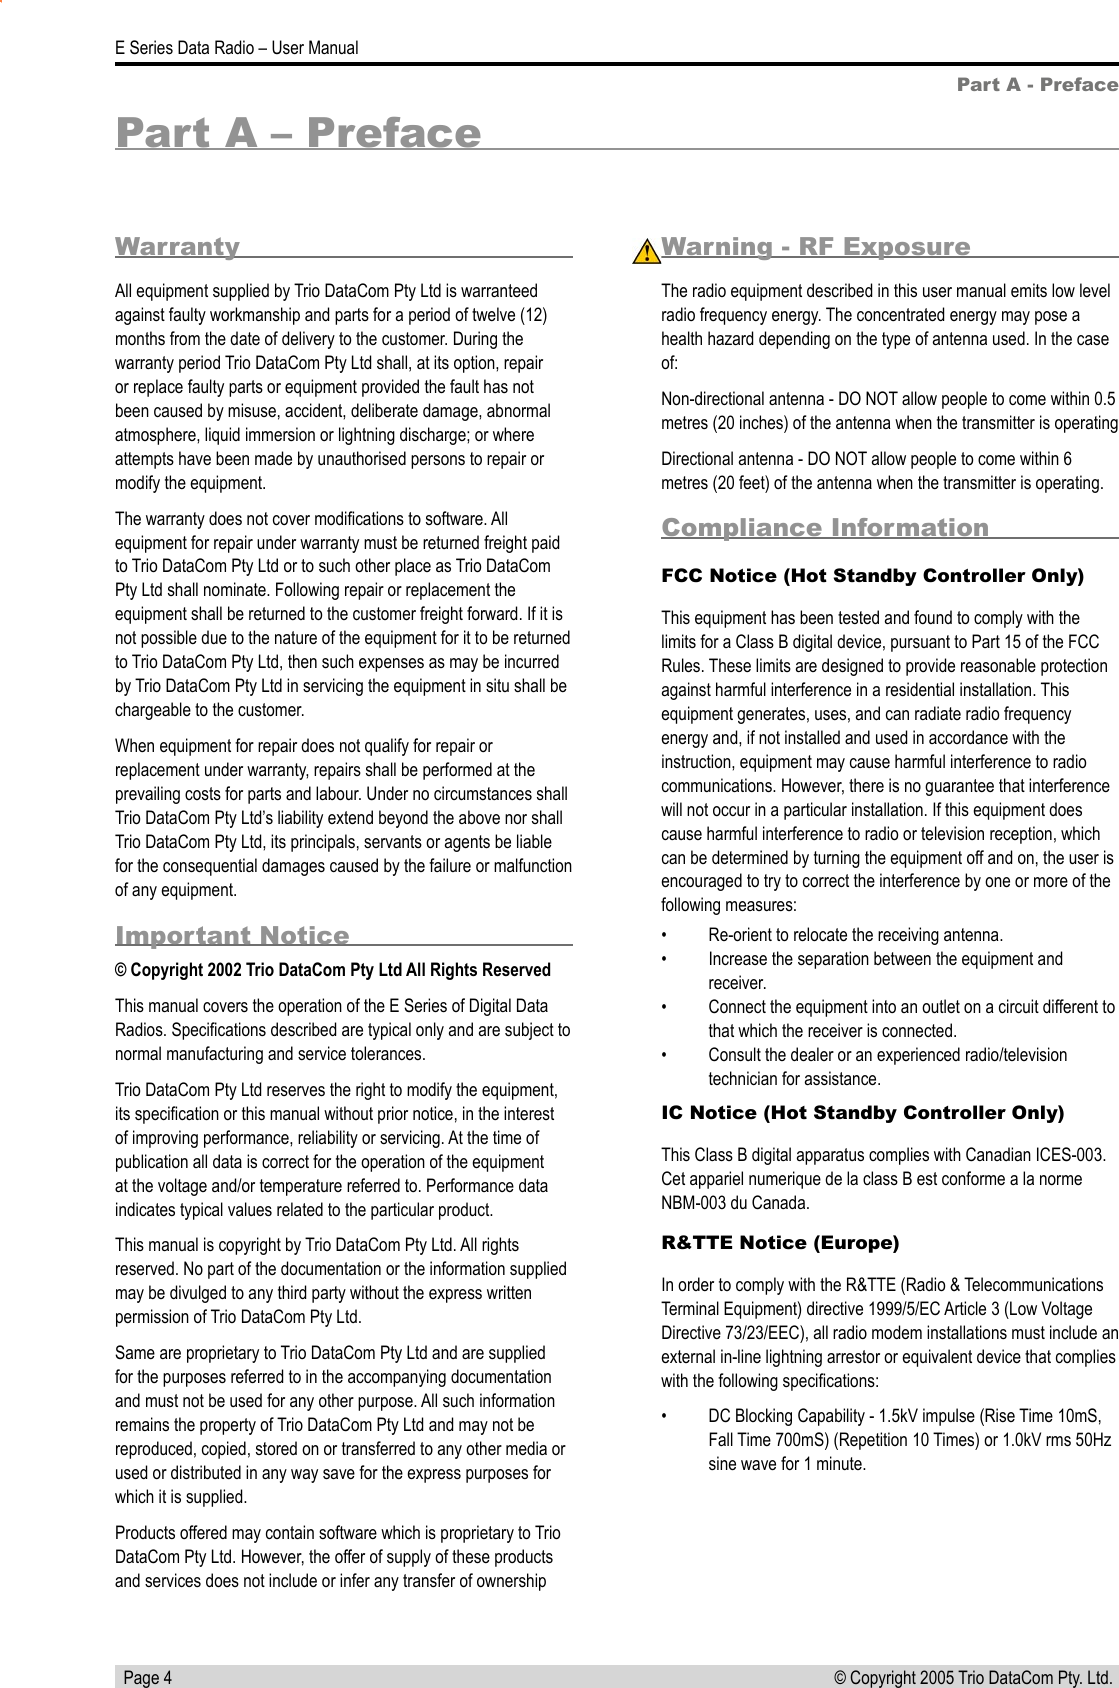   Page 4E Series Data Radio – User Manual© Copyright 2005 Trio DataCom Pty. Ltd. WarrantyAll equipment supplied by Trio DataCom Pty Ltd is warranteed against faulty workmanship and parts for a period of twelve (12) months from the date of delivery to the customer. During the warranty period Trio DataCom Pty Ltd shall, at its option, repair or replace faulty parts or equipment provided the fault has not been caused by misuse, accident, deliberate damage, abnormal atmosphere, liquid immersion or lightning discharge; or where attempts have been made by unauthorised persons to repair or modify the equipment. The warranty does not cover modiﬁcations to software. All equipment for repair under warranty must be returned freight paid to Trio DataCom Pty Ltd or to such other place as Trio DataCom Pty Ltd shall nominate. Following repair or replacement the equipment shall be returned to the customer freight forward. If it is not possible due to the nature of the equipment for it to be returned to Trio DataCom Pty Ltd, then such expenses as may be incurred by Trio DataCom Pty Ltd in servicing the equipment in situ shall be chargeable to the customer.  When equipment for repair does not qualify for repair or replacement under warranty, repairs shall be performed at the prevailing costs for parts and labour. Under no circumstances shall Trio DataCom Pty Ltd’s liability extend beyond the above nor shall Trio DataCom Pty Ltd, its principals, servants or agents be liable for the consequential damages caused by the failure or malfunction of any equipment.Important Notice© Copyright 2002 Trio DataCom Pty Ltd All Rights ReservedThis manual covers the operation of the E Series of Digital Data Radios. Speciﬁcations described are typical only and are subject to normal manufacturing and service tolerances.Trio DataCom Pty Ltd reserves the right to modify the equipment, its speciﬁcation or this manual without prior notice, in the interest of improving performance, reliability or servicing. At the time of publication all data is correct for the operation of the equipment at the voltage and/or temperature referred to. Performance data indicates typical values related to the particular product.This manual is copyright by Trio DataCom Pty Ltd. All rights reserved. No part of the documentation or the information supplied may be divulged to any third party without the express written permission of Trio DataCom Pty Ltd.Same are proprietary to Trio DataCom Pty Ltd and are supplied for the purposes referred to in the accompanying documentation and must not be used for any other purpose. All such information remains the property of Trio DataCom Pty Ltd and may not be reproduced, copied, stored on or transferred to any other media or used or distributed in any way save for the express purposes for which it is supplied.Products offered may contain software which is proprietary to Trio DataCom Pty Ltd. However, the offer of supply of these products and services does not include or infer any transfer of ownership Part A - PrefaceWarning - RF ExposureThe radio equipment described in this user manual emits low level radio frequency energy. The concentrated energy may pose a health hazard depending on the type of antenna used. In the case of:Non-directional antenna - DO NOT allow people to come within 0.5 metres (20 inches) of the antenna when the transmitter is operatingDirectional antenna - DO NOT allow people to come within 6 metres (20 feet) of the antenna when the transmitter is operating.Compliance Information FCC Notice (Hot Standby Controller Only)This equipment has been tested and found to comply with the limits for a Class B digital device, pursuant to Part 15 of the FCC Rules. These limits are designed to provide reasonable protection against harmful interference in a residential installation. This equipment generates, uses, and can radiate radio frequency energy and, if not installed and used in accordance with the instruction, equipment may cause harmful interference to radio communications. However, there is no guarantee that interference will not occur in a particular installation. If this equipment does cause harmful interference to radio or television reception, which can be determined by turning the equipment off and on, the user is encouraged to try to correct the interference by one or more of the following measures:•  Re-orient to relocate the receiving antenna.•  Increase the separation between the equipment and receiver.•  Connect the equipment into an outlet on a circuit different to that which the receiver is connected.•  Consult the dealer or an experienced radio/television technician for assistance.IC Notice (Hot Standby Controller Only)This Class B digital apparatus complies with Canadian ICES-003. Cet appariel numerique de la class B est conforme a la norme NBM-003 du Canada.R&amp;TTE Notice (Europe)In order to comply with the R&amp;TTE (Radio &amp; Telecommunications Terminal Equipment) directive 1999/5/EC Article 3 (Low Voltage Directive 73/23/EEC), all radio modem installations must include an external in-line lightning arrestor or equivalent device that complies with the following speciﬁcations: •  DC Blocking Capability - 1.5kV impulse (Rise Time 10mS, Fall Time 700mS) (Repetition 10 Times) or 1.0kV rms 50Hz sine wave for 1 minute.Part A – Preface